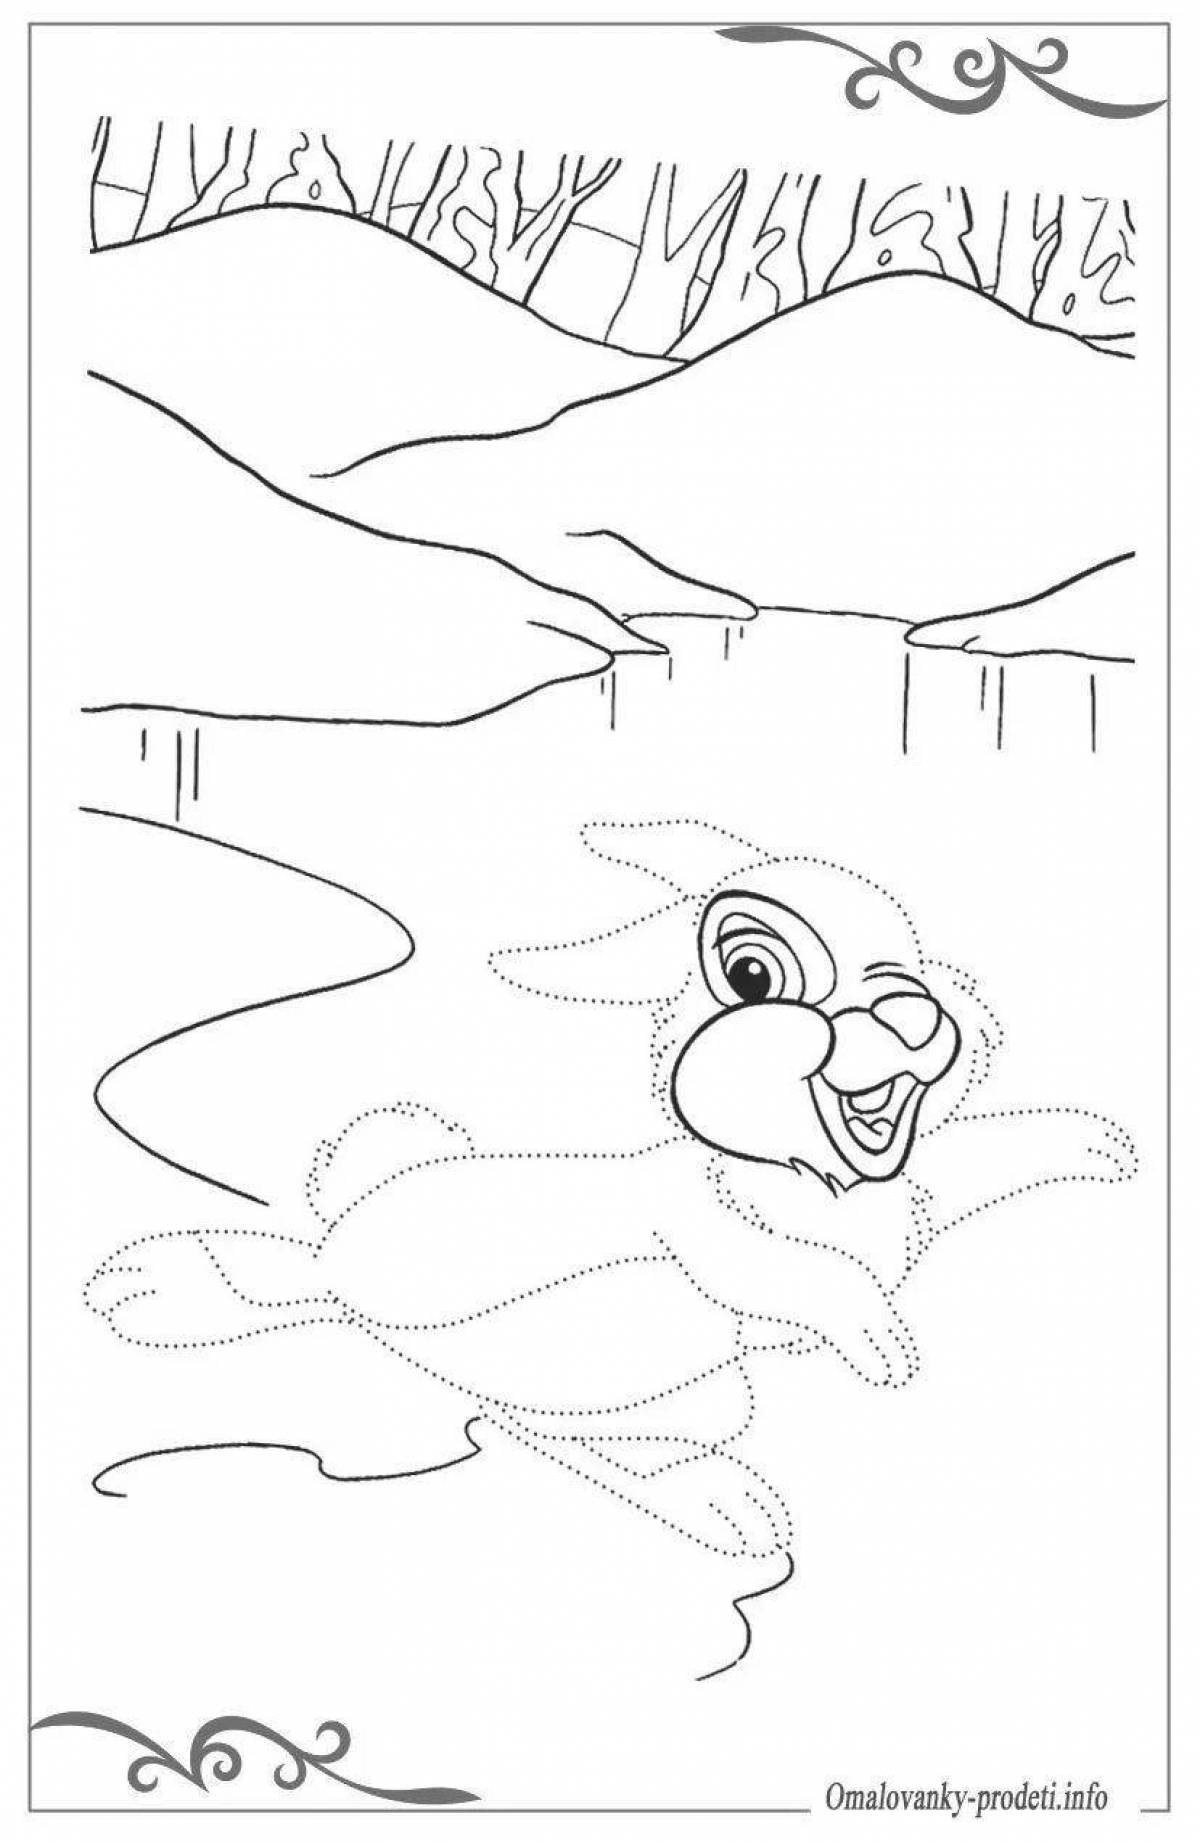 Awesome winter animal coloring pages